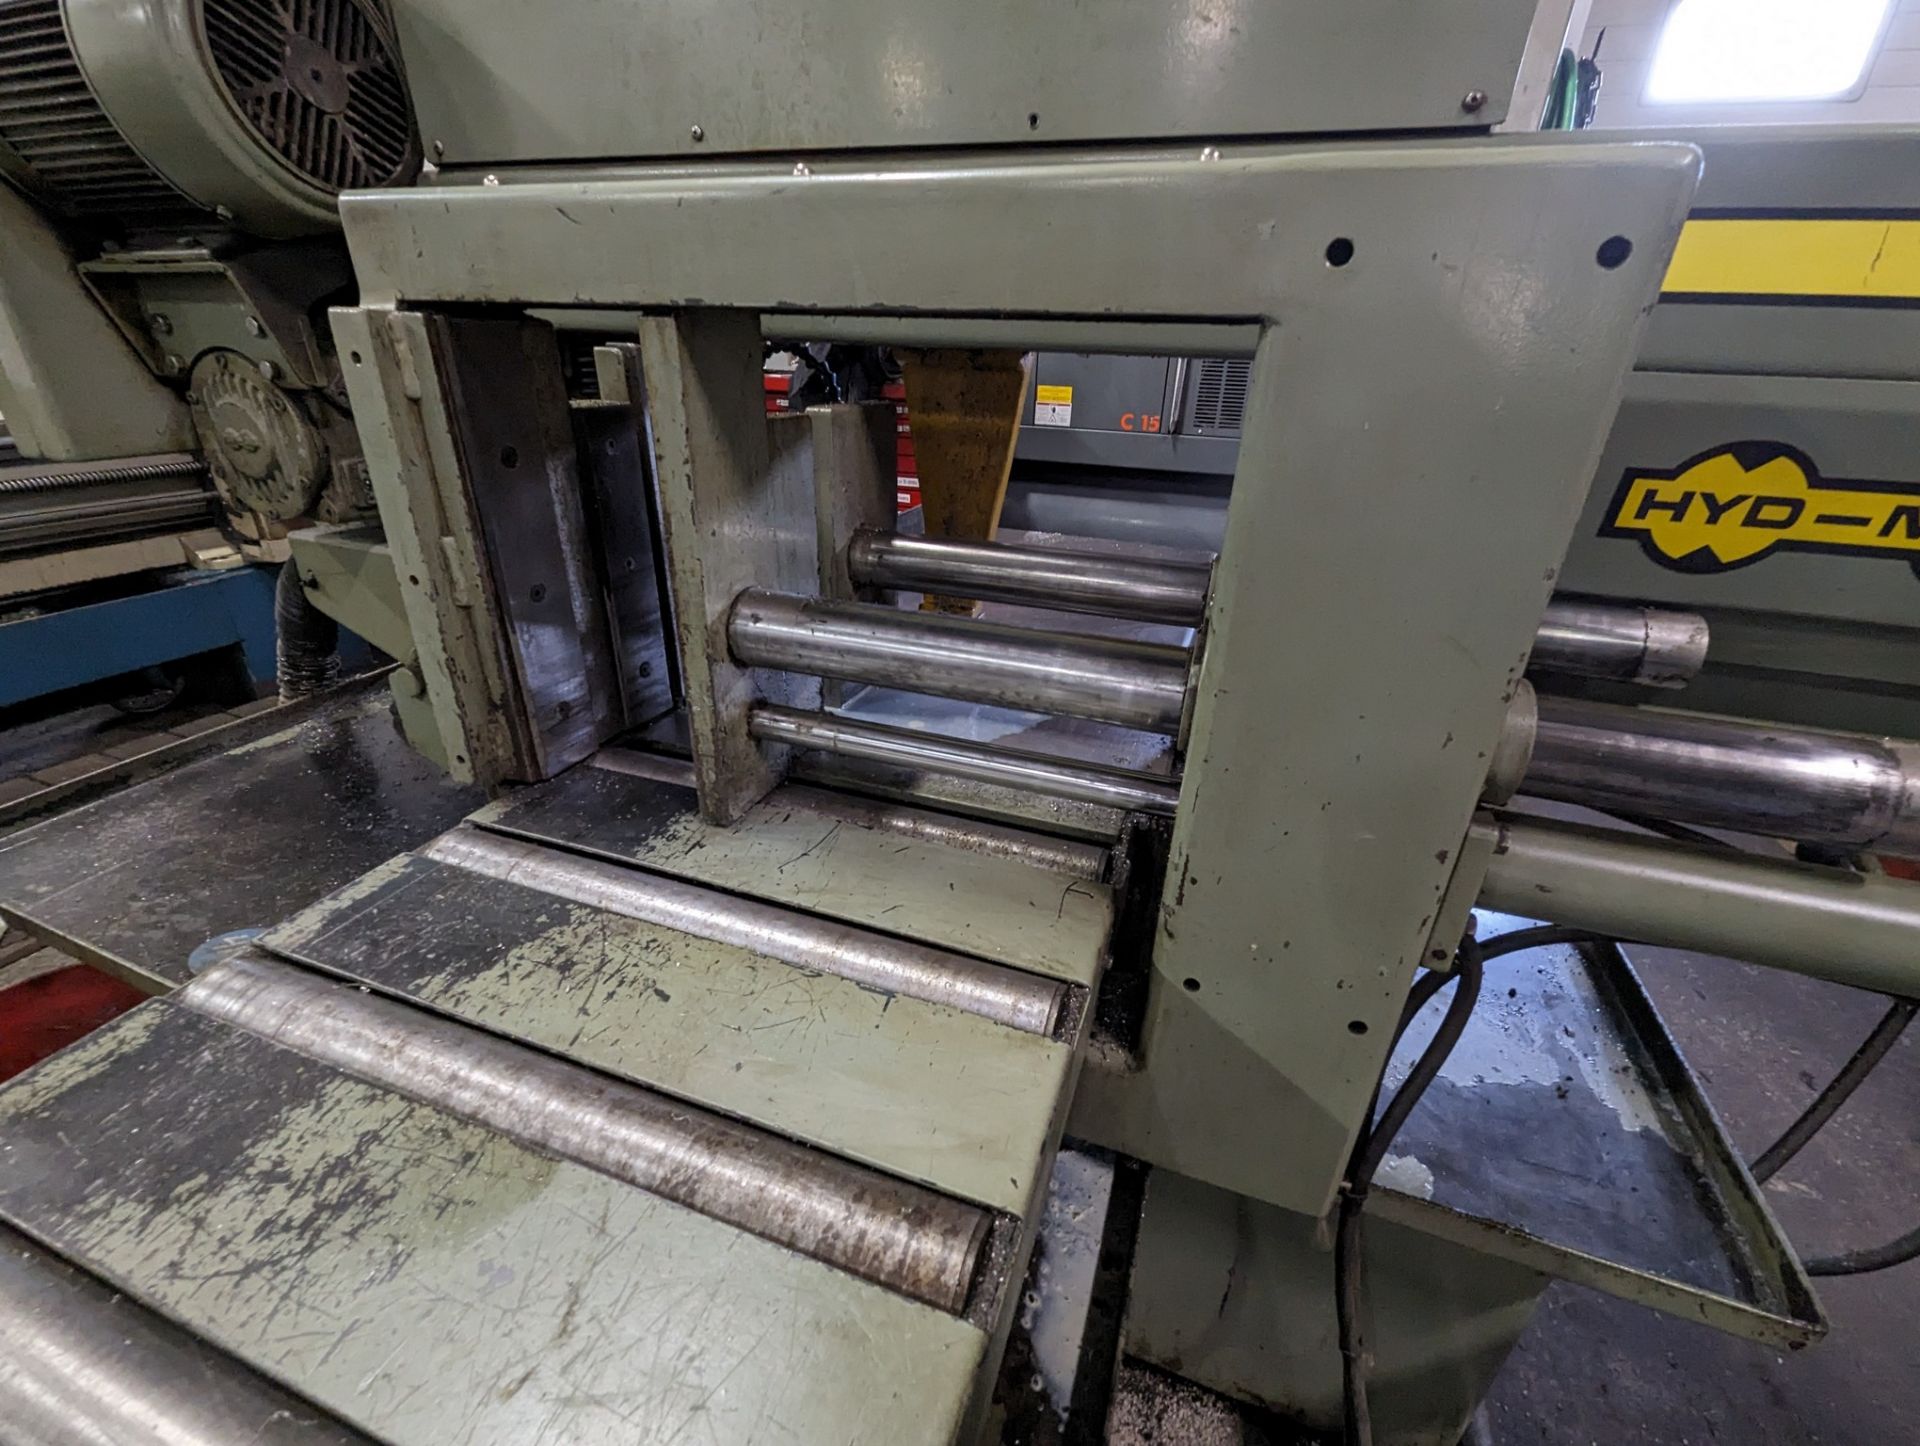 HYD-MECH S-20A SERIES II AUTOMATIC HORIZONTAL BANDSAW, S/N 80298380 W/ CONVEYOR (RIGGING FEE $825) - Image 9 of 11